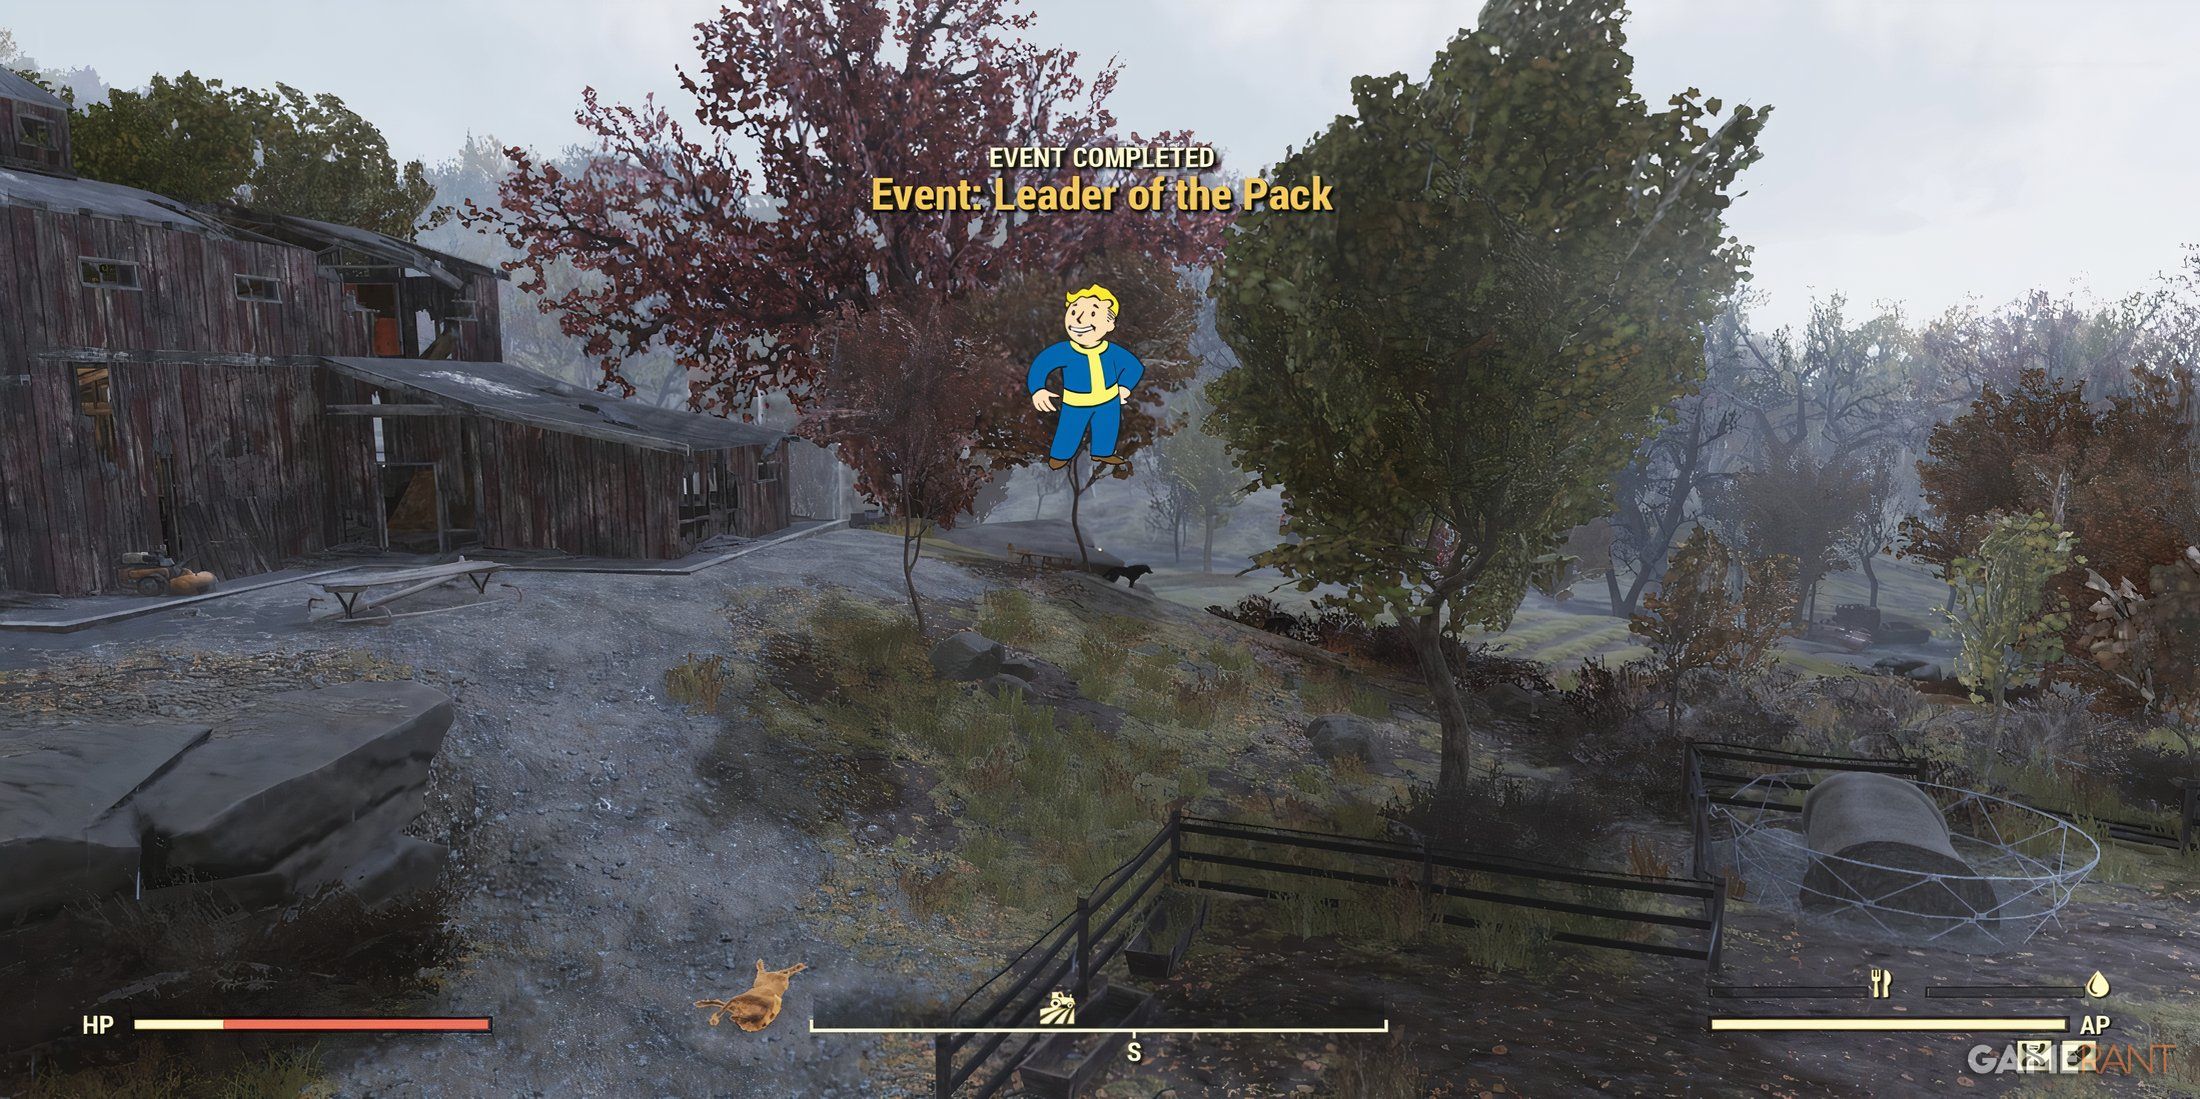 Leader Of The Pack Event Complete in Fallout 76